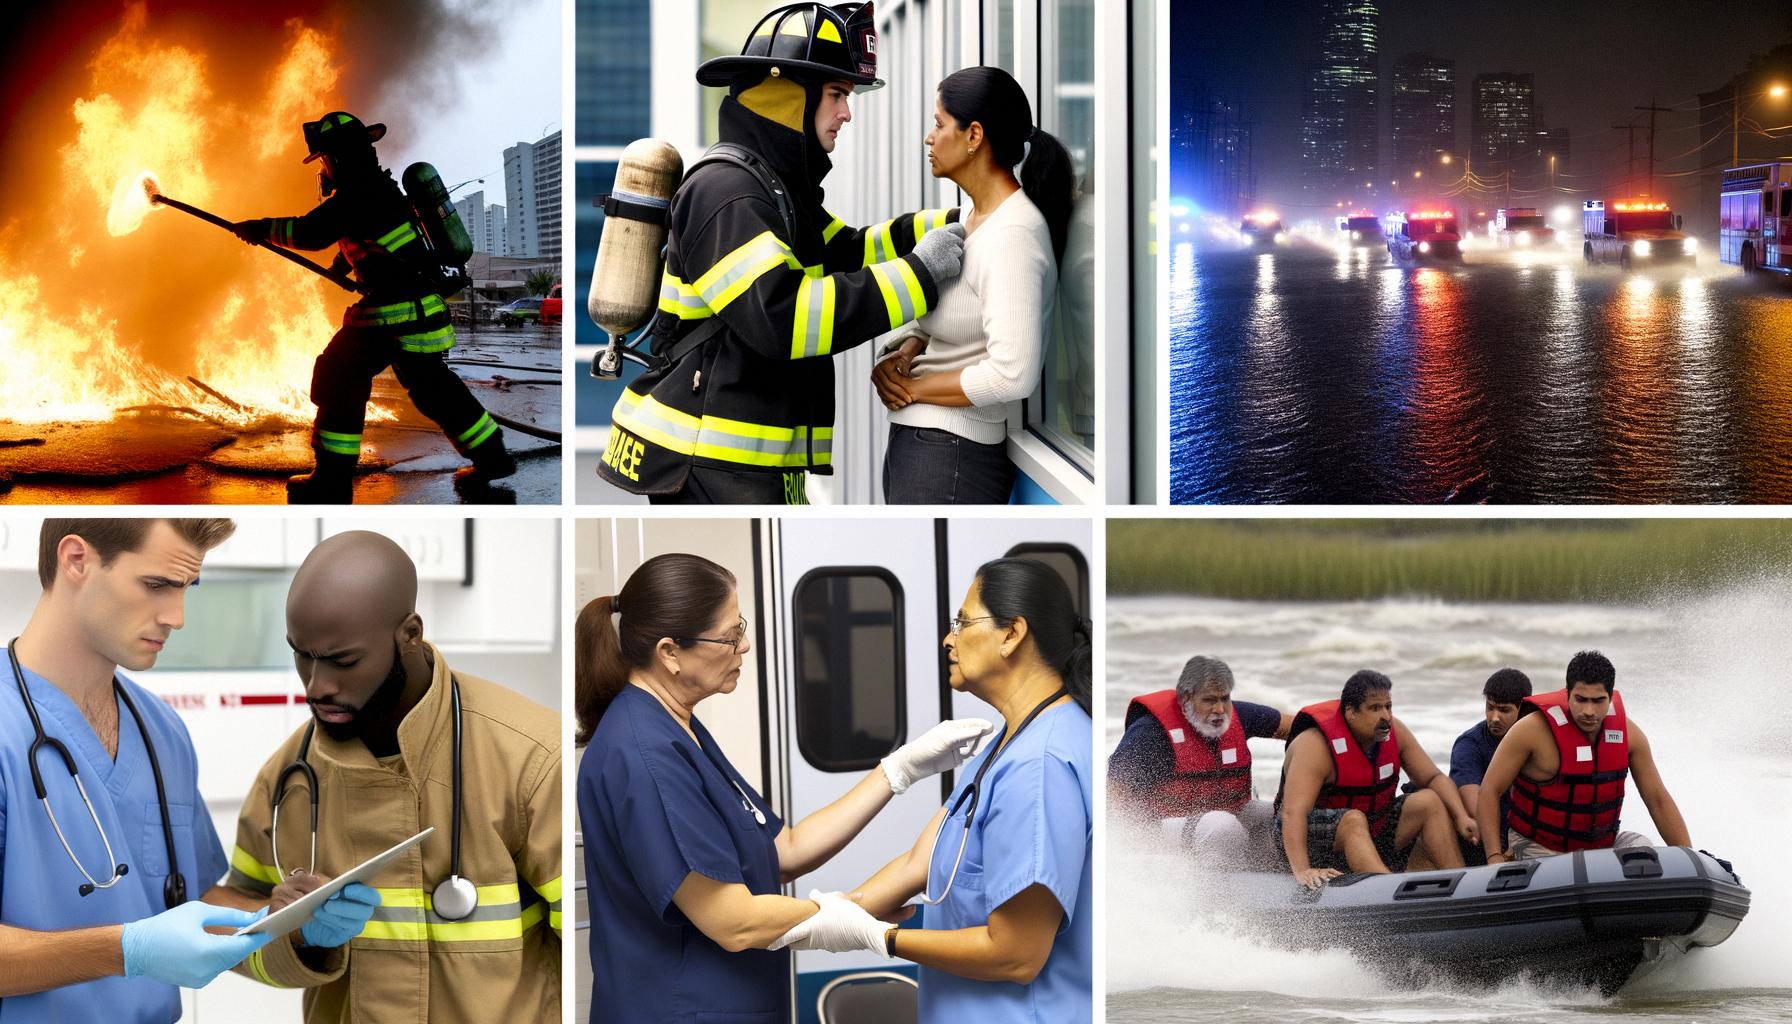 Multiple emergency response incidents occurred globally Balanced News